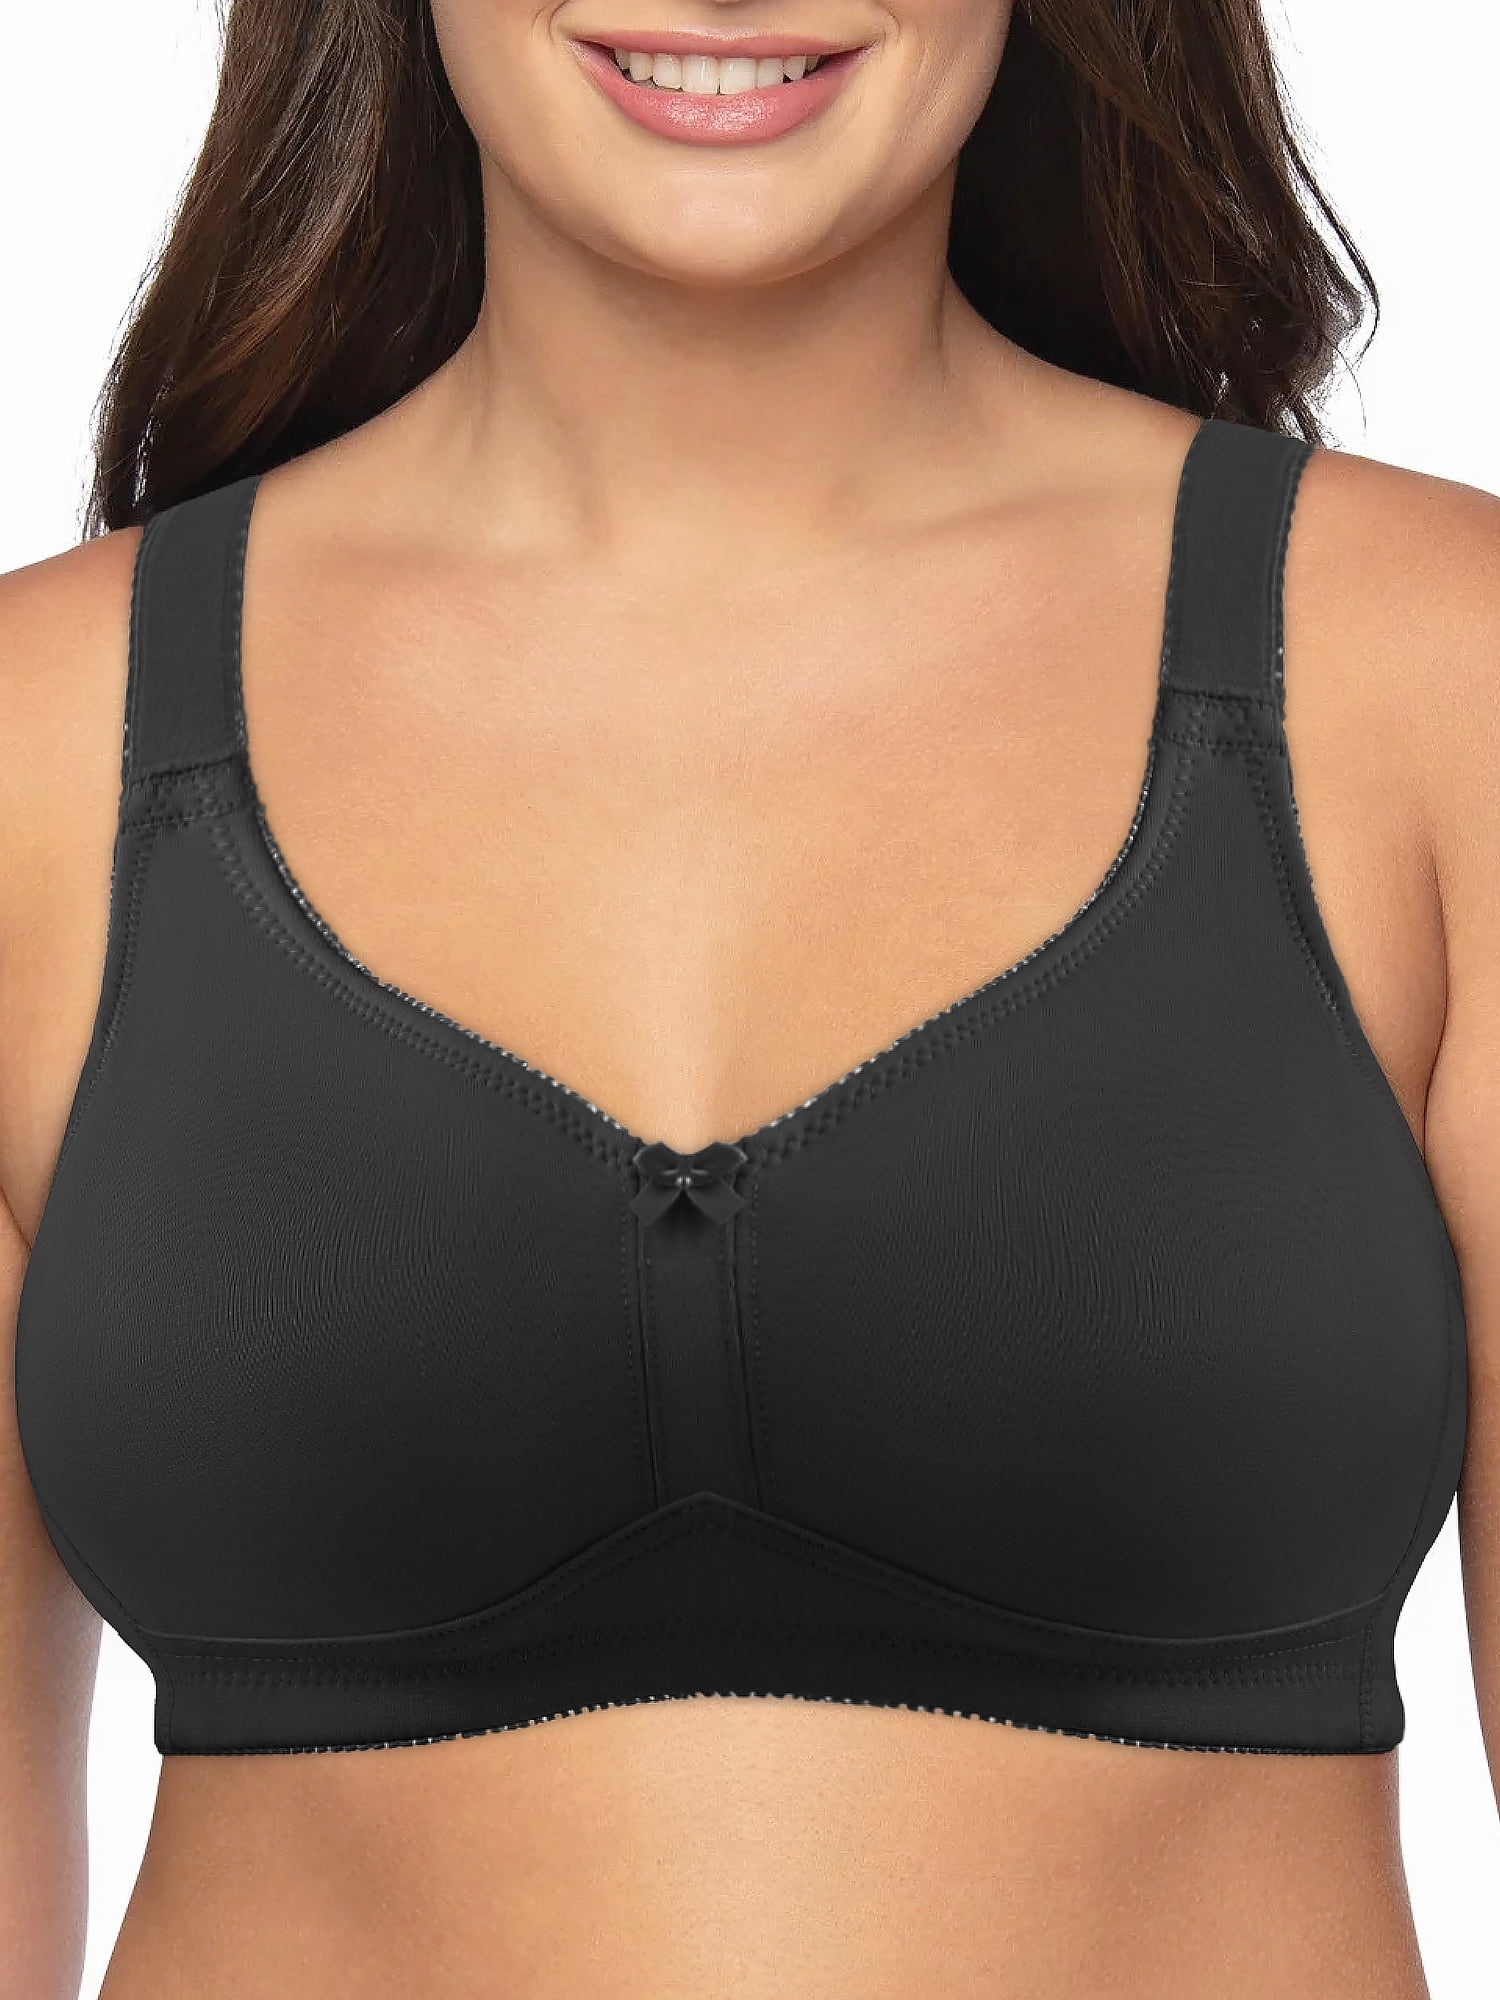 AILIVIN Wireless Bras For Women Comfort Surgery Bra With